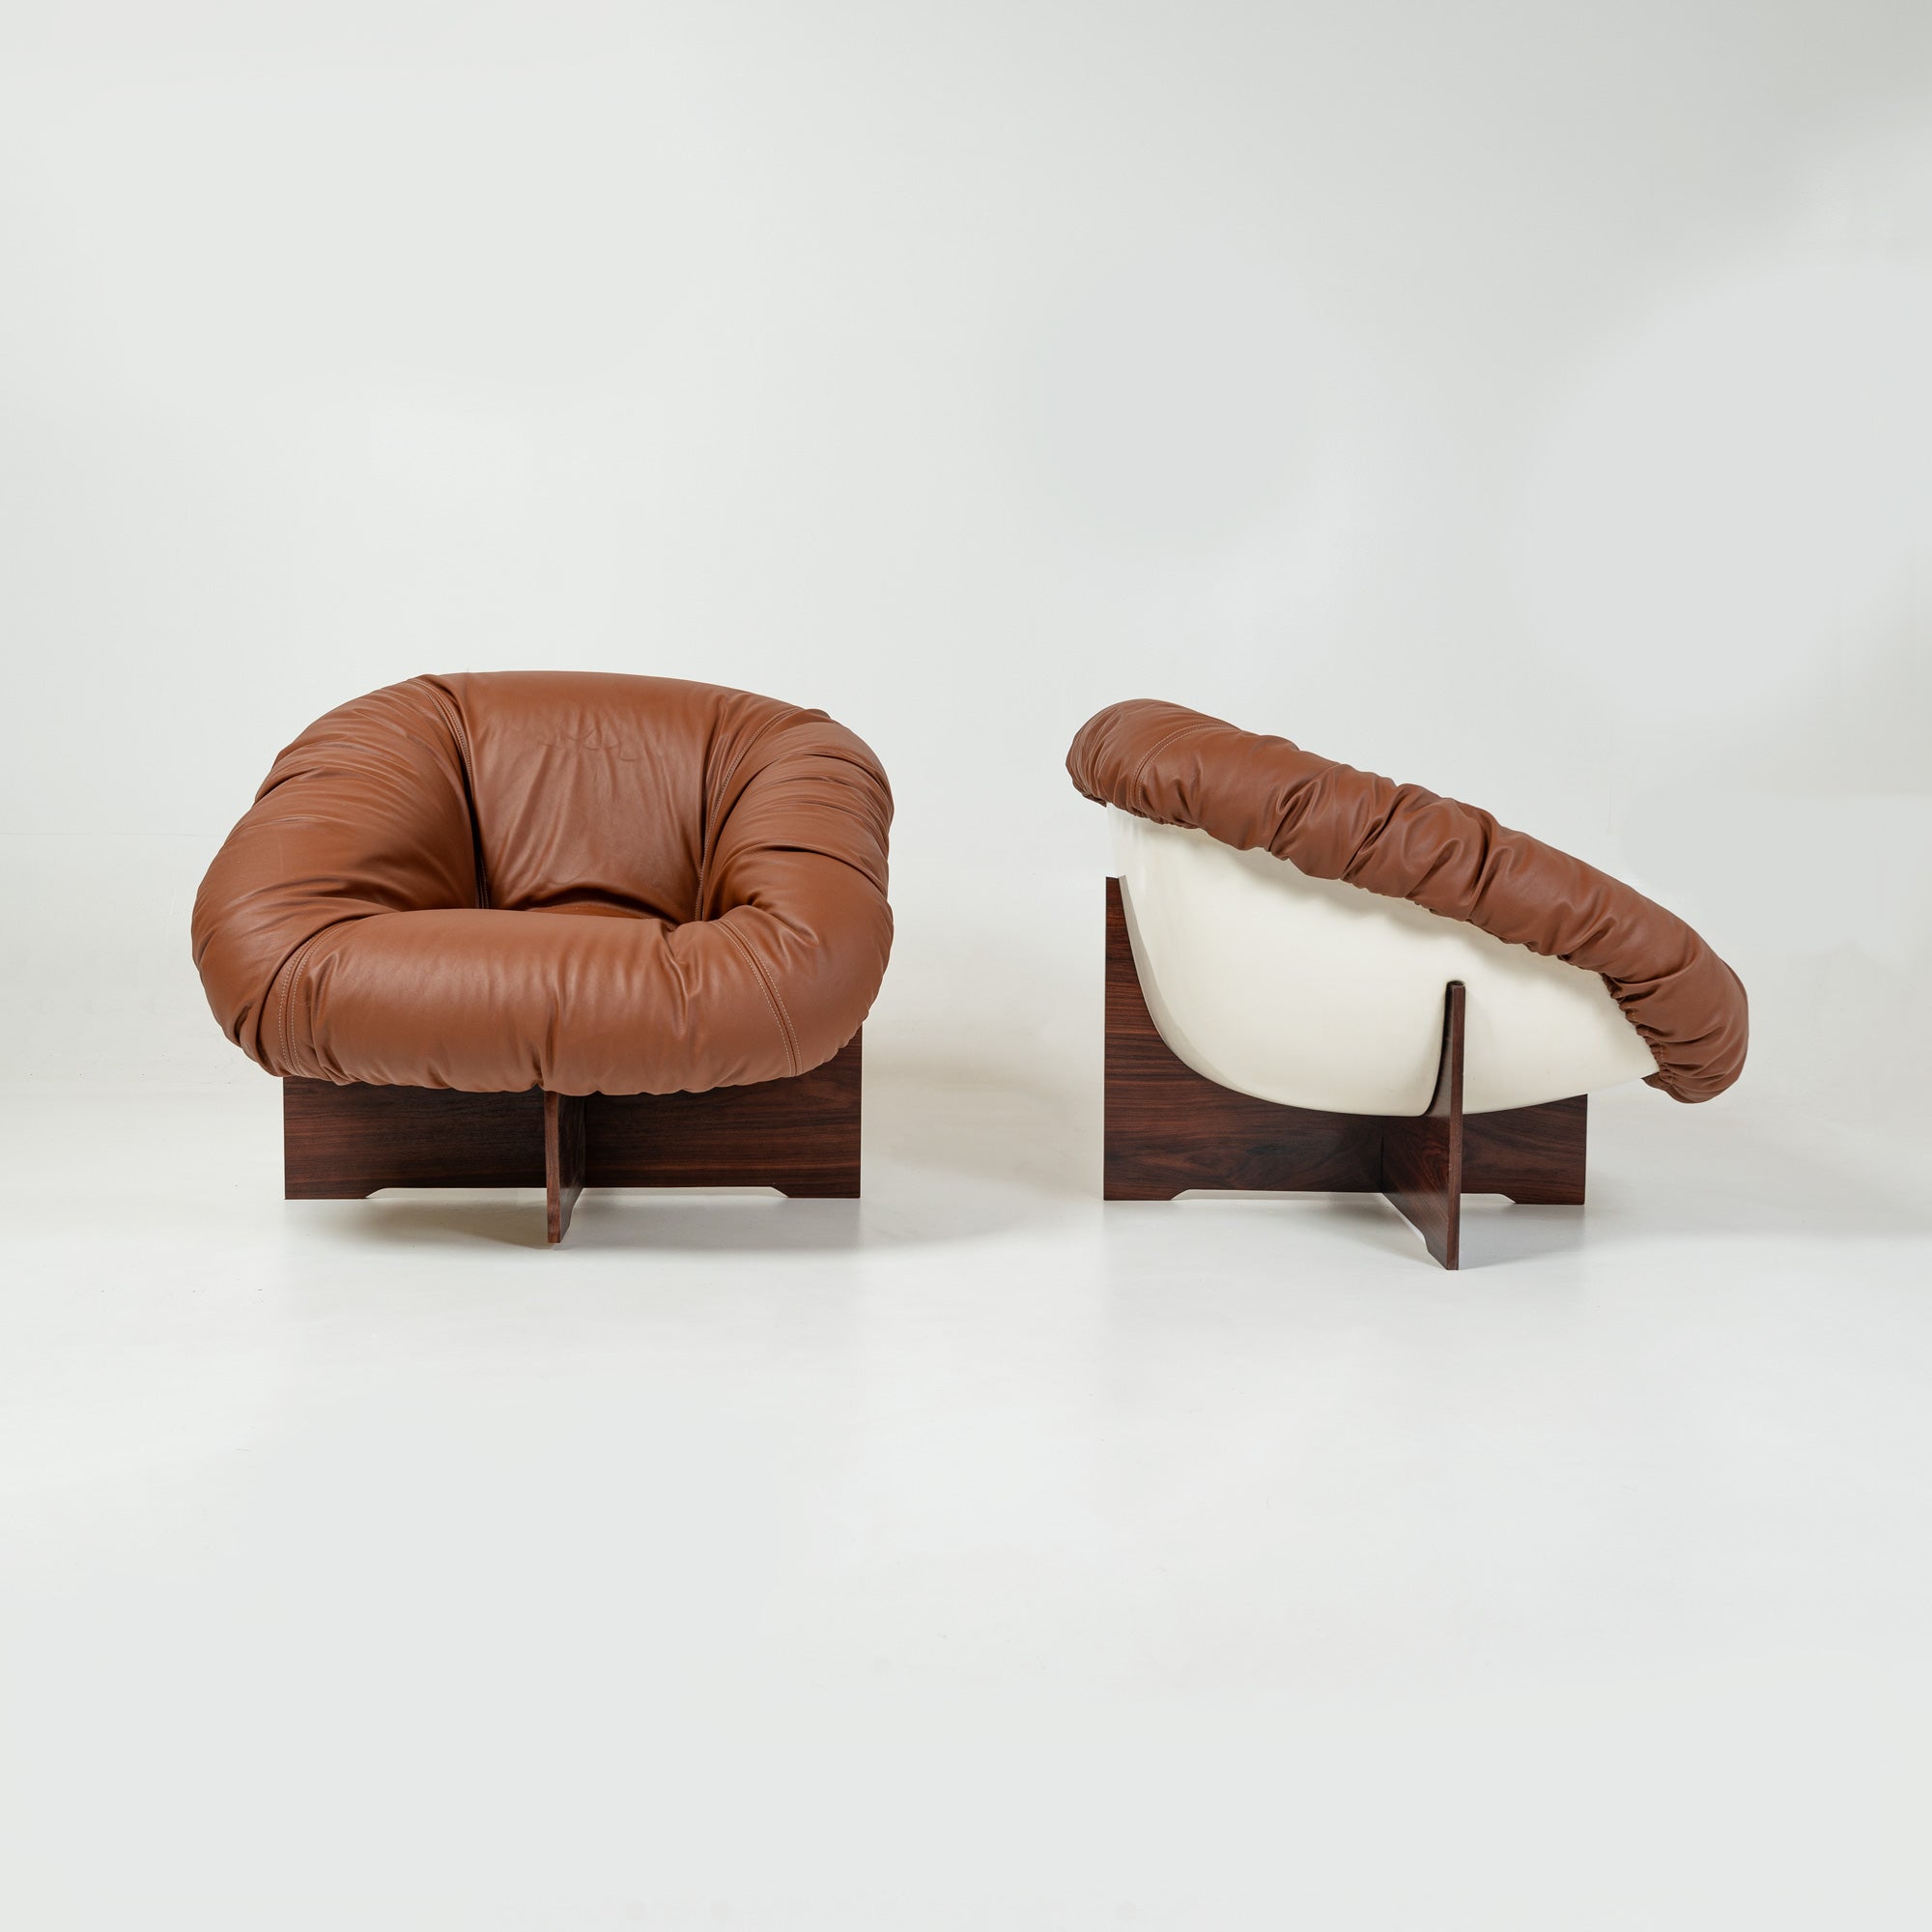 Percival Lafer's MP-61 Lounge Chair in Maharam Leather and Rosewood, 1973